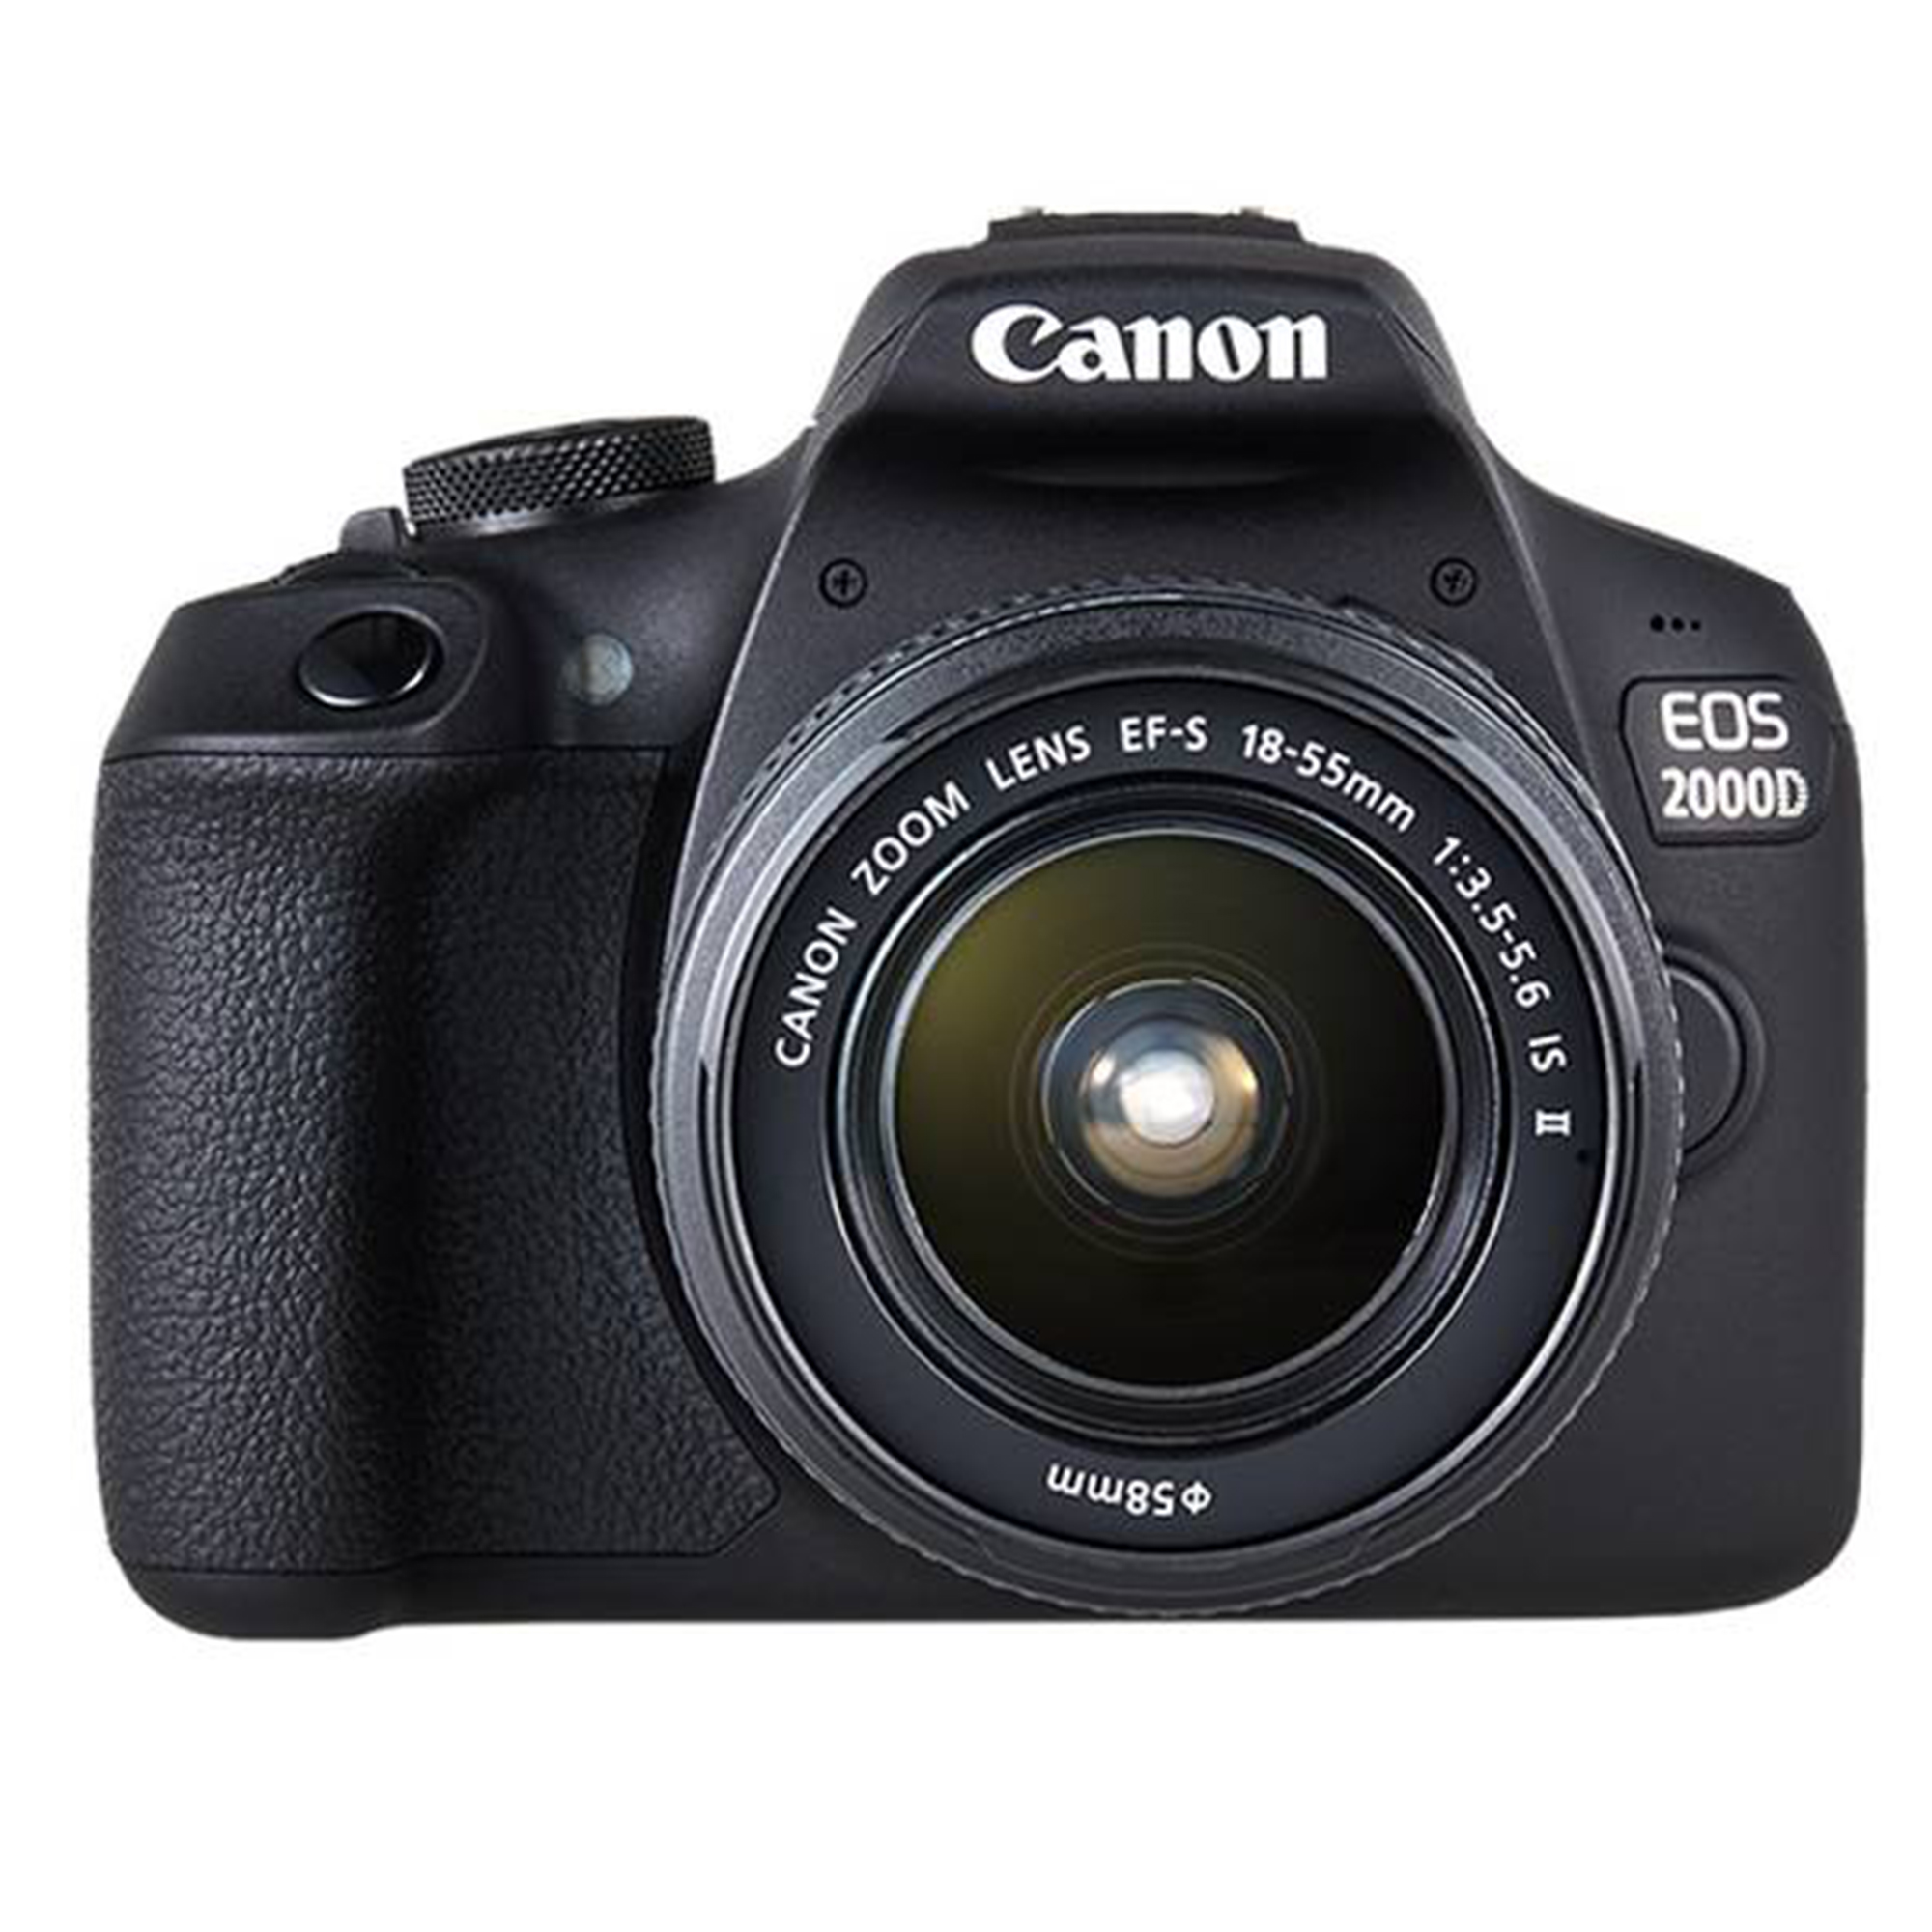 Canon EOS 2000D With 18-55mm Lens IS Kit